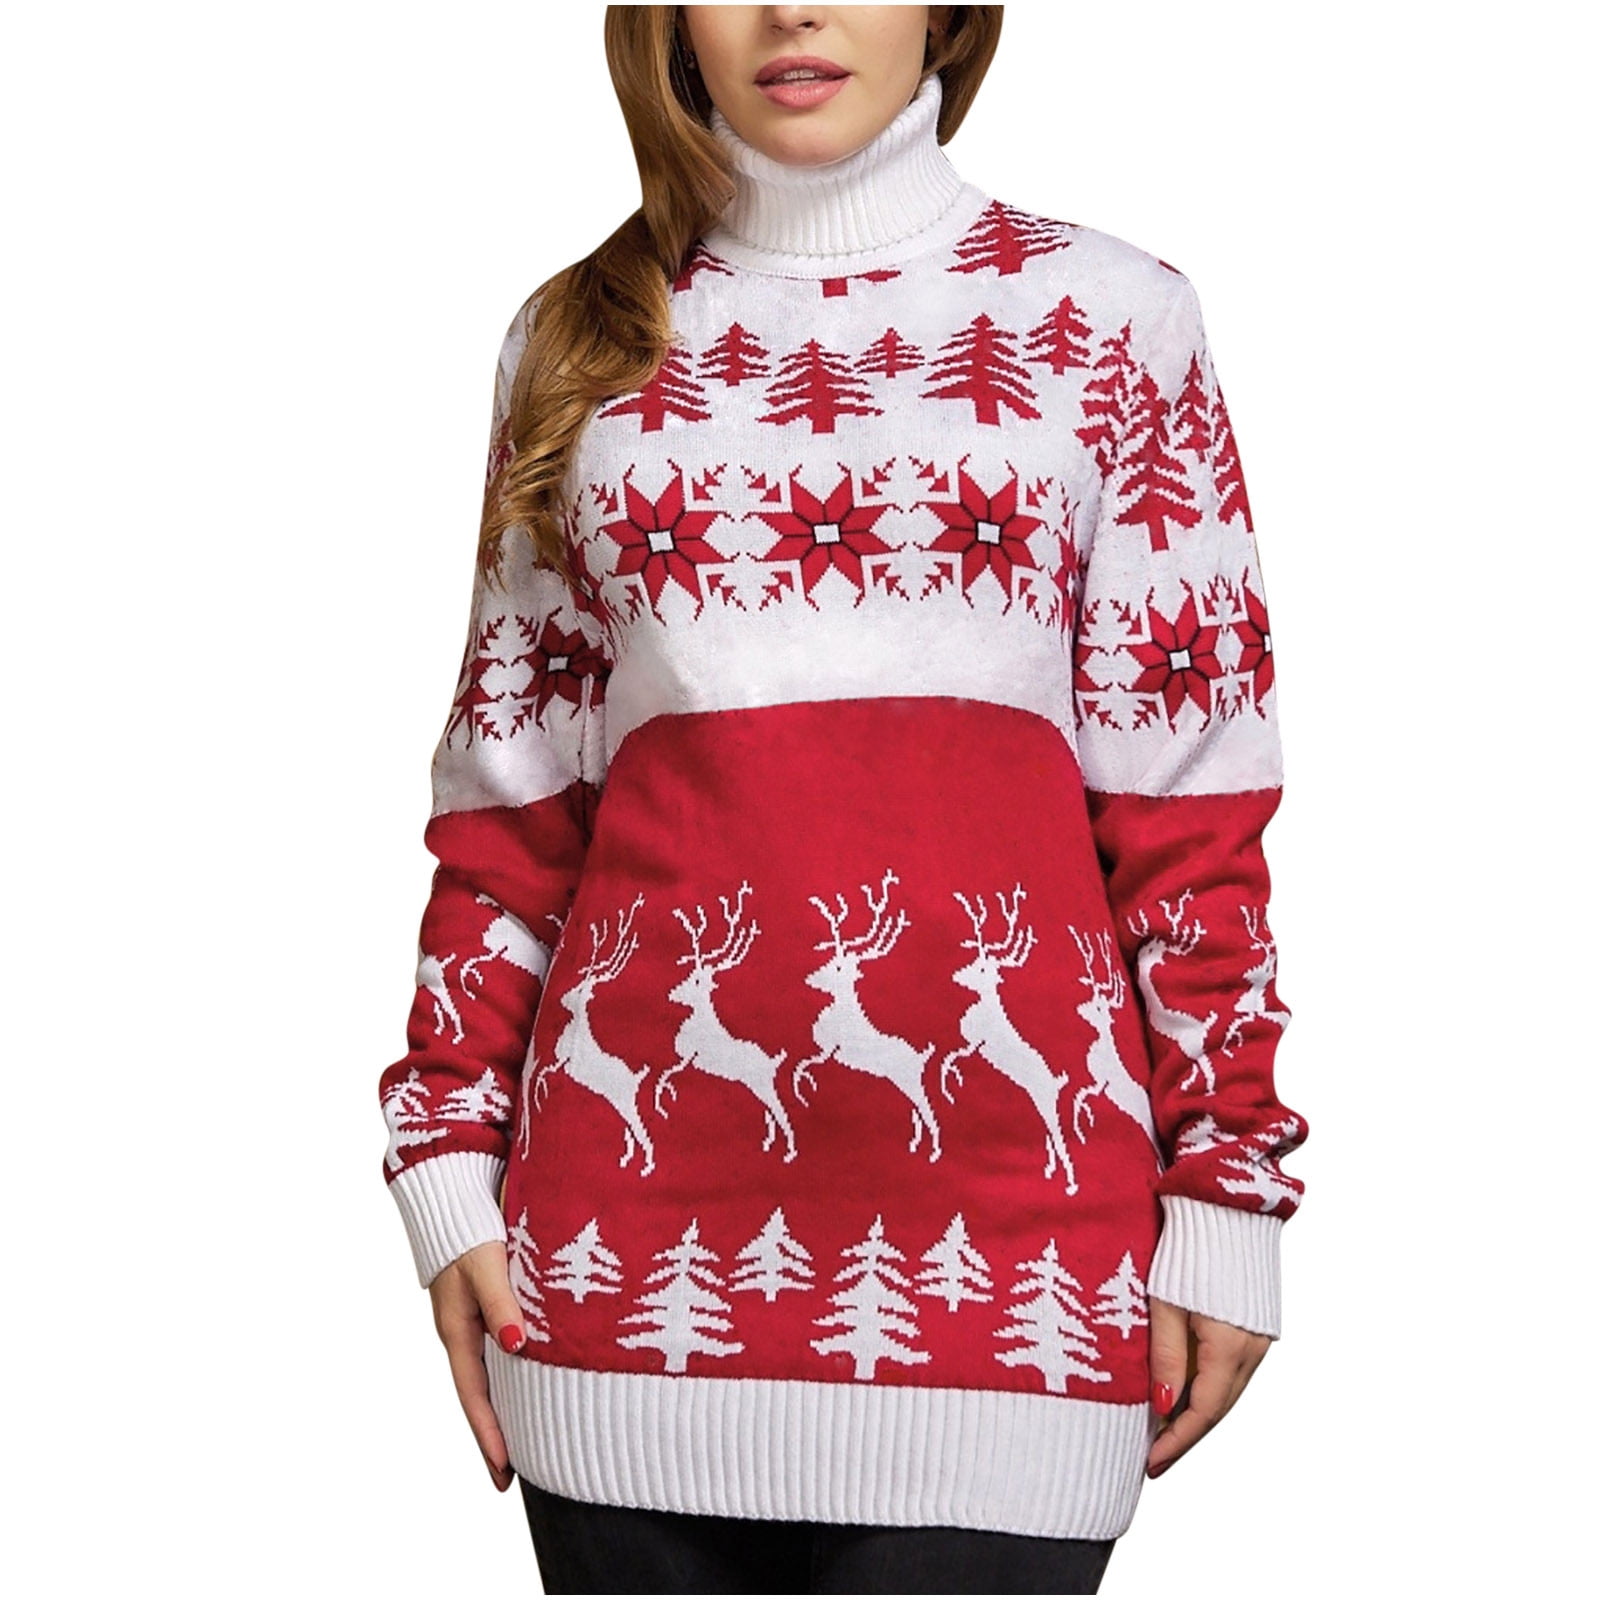 YWDJ Cute Christmas Sweaters for Women Plus Size Round-Neck